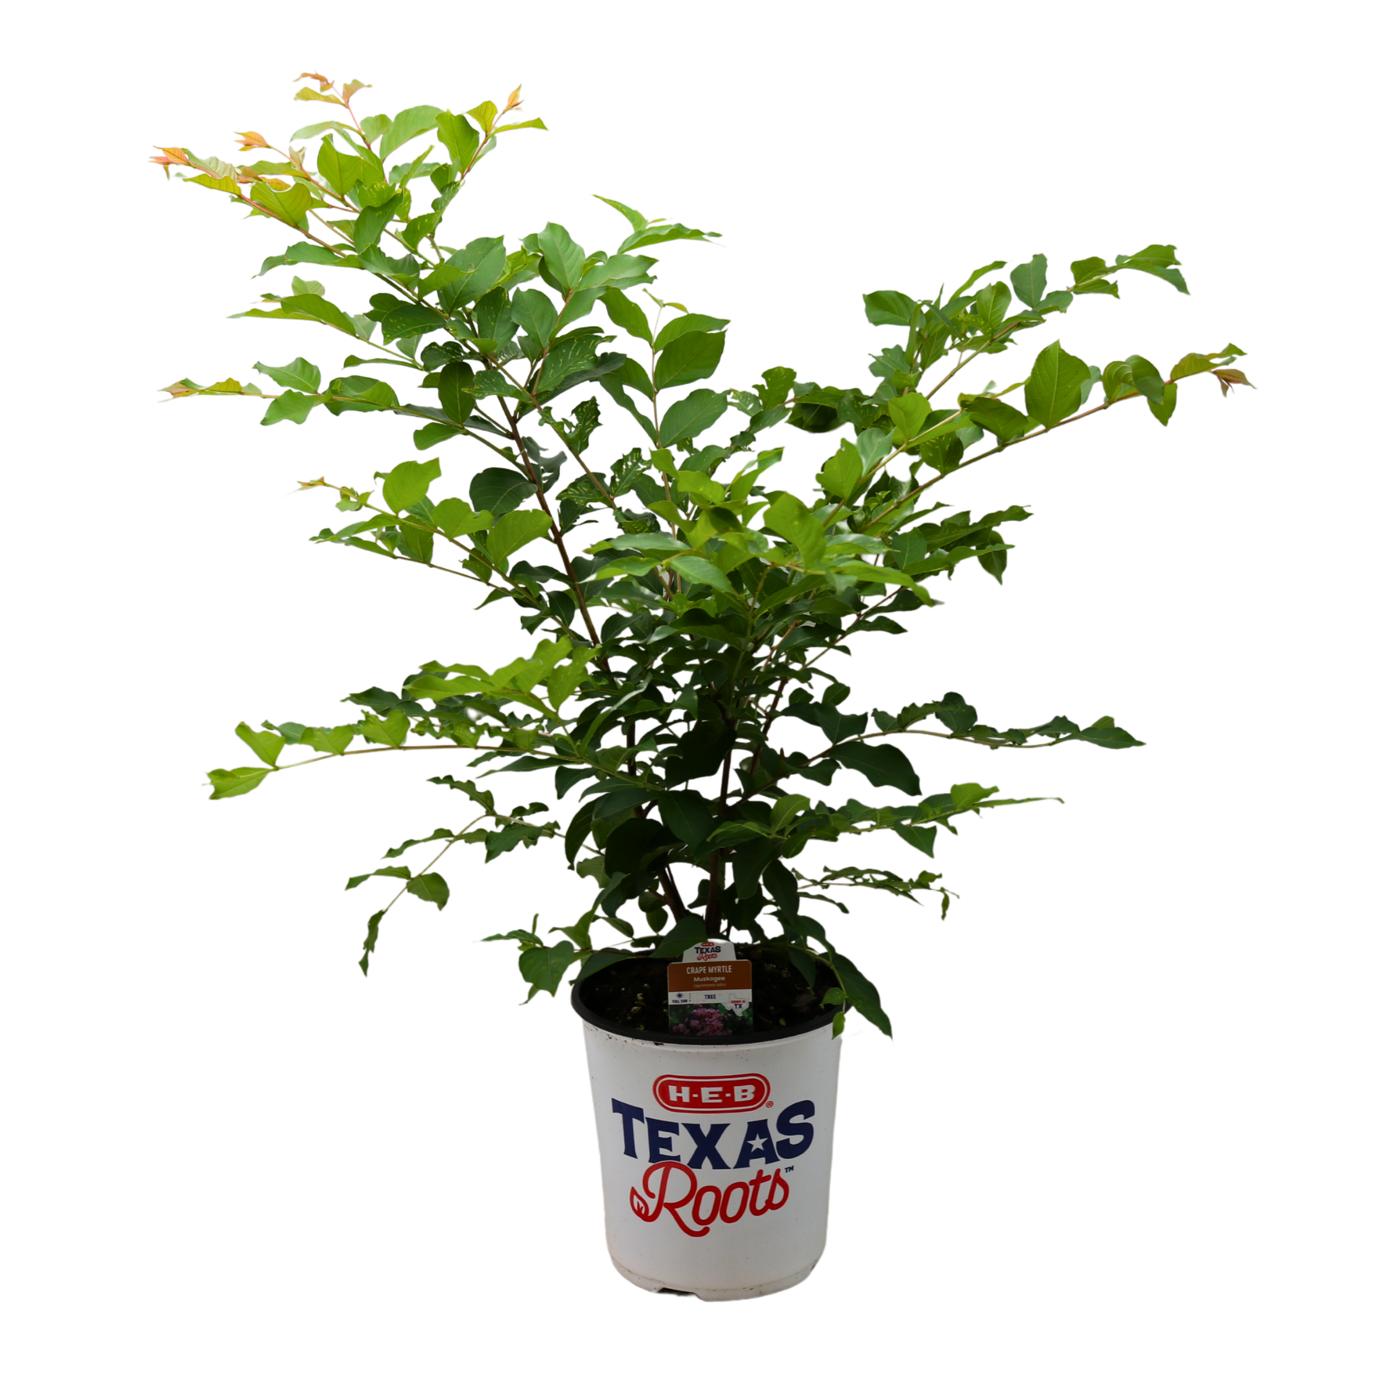 H-E-B Texas Roots Crape Myrtle Muskogee; image 1 of 2